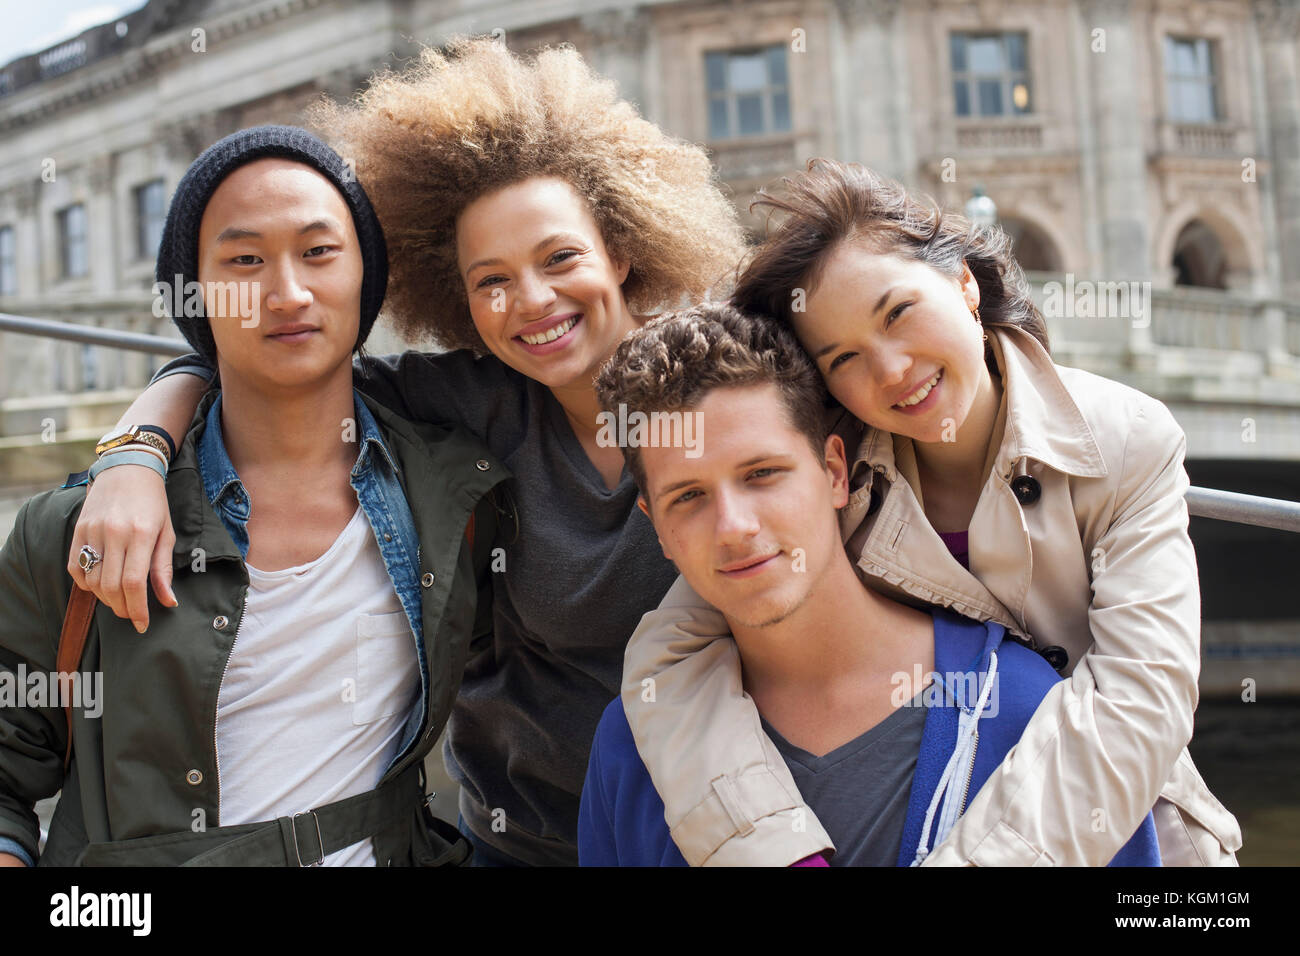 Low angle portrait of smiling young multi-ethnic friends against Bode Museum, Berlin, Germany Stock Photo